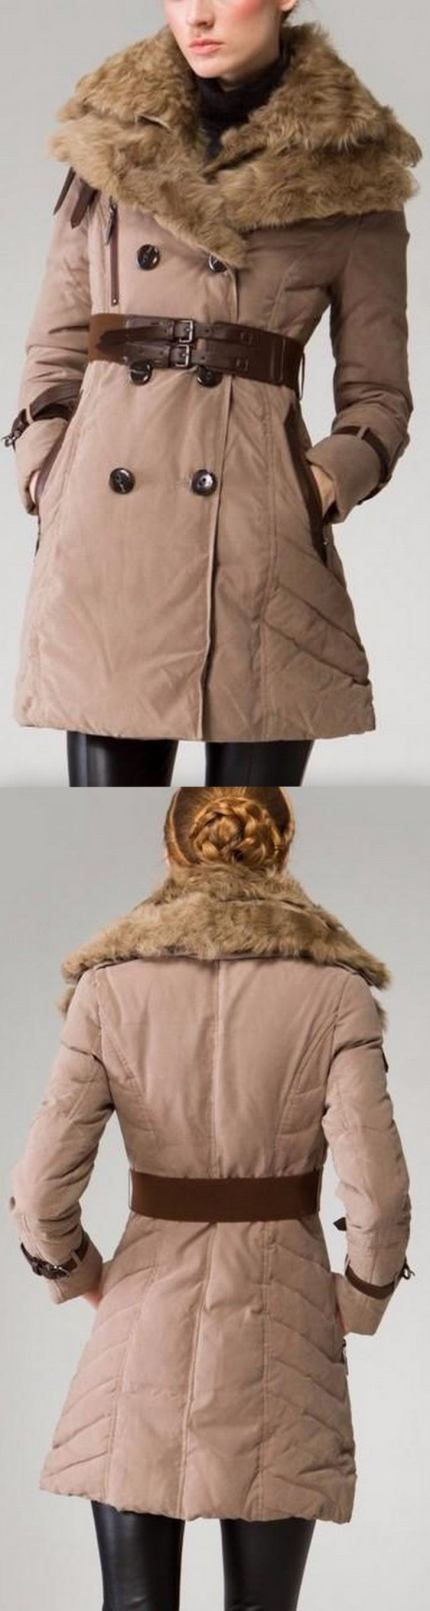 Buckled Sheep-Fur-Collar Double Breasted Down Coat in Khaki